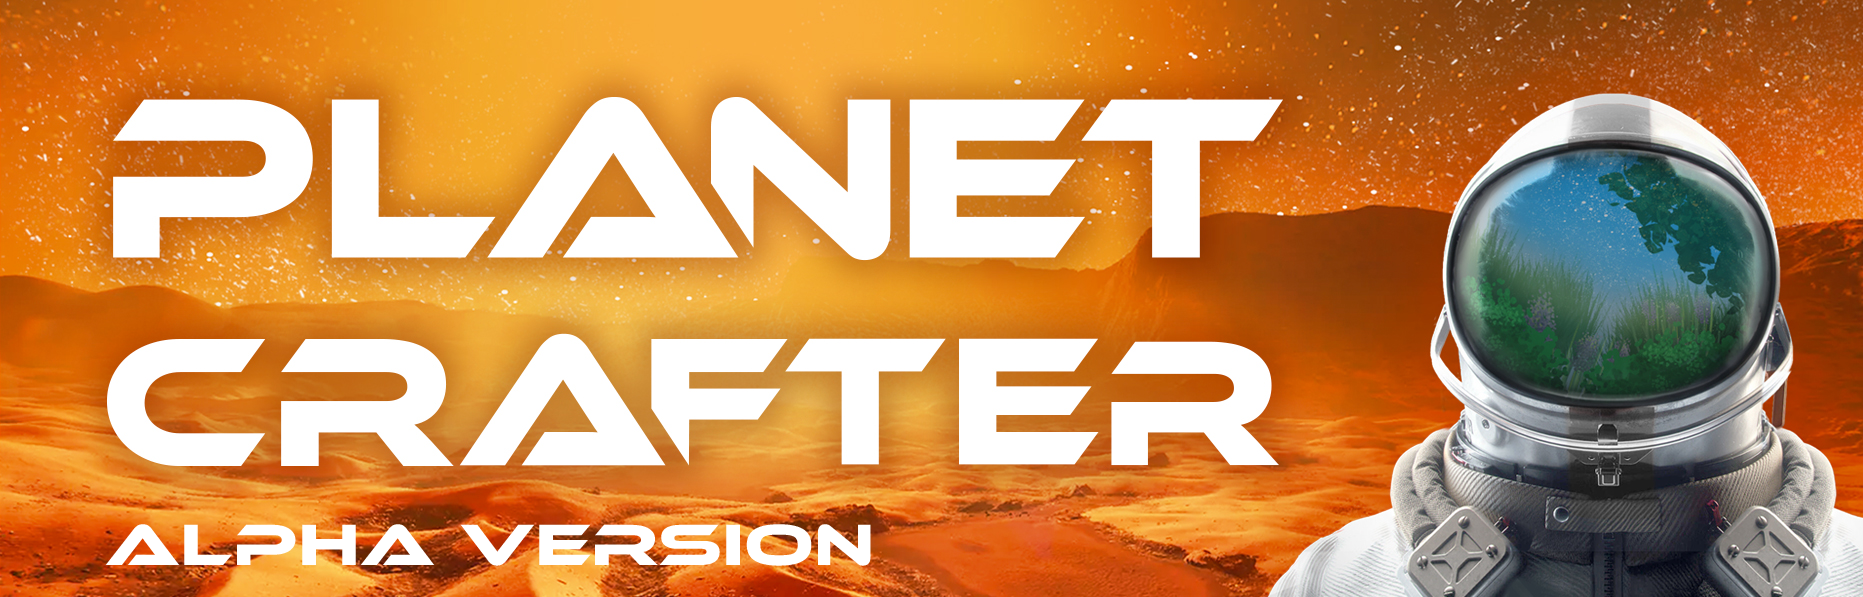 Planet Crafter